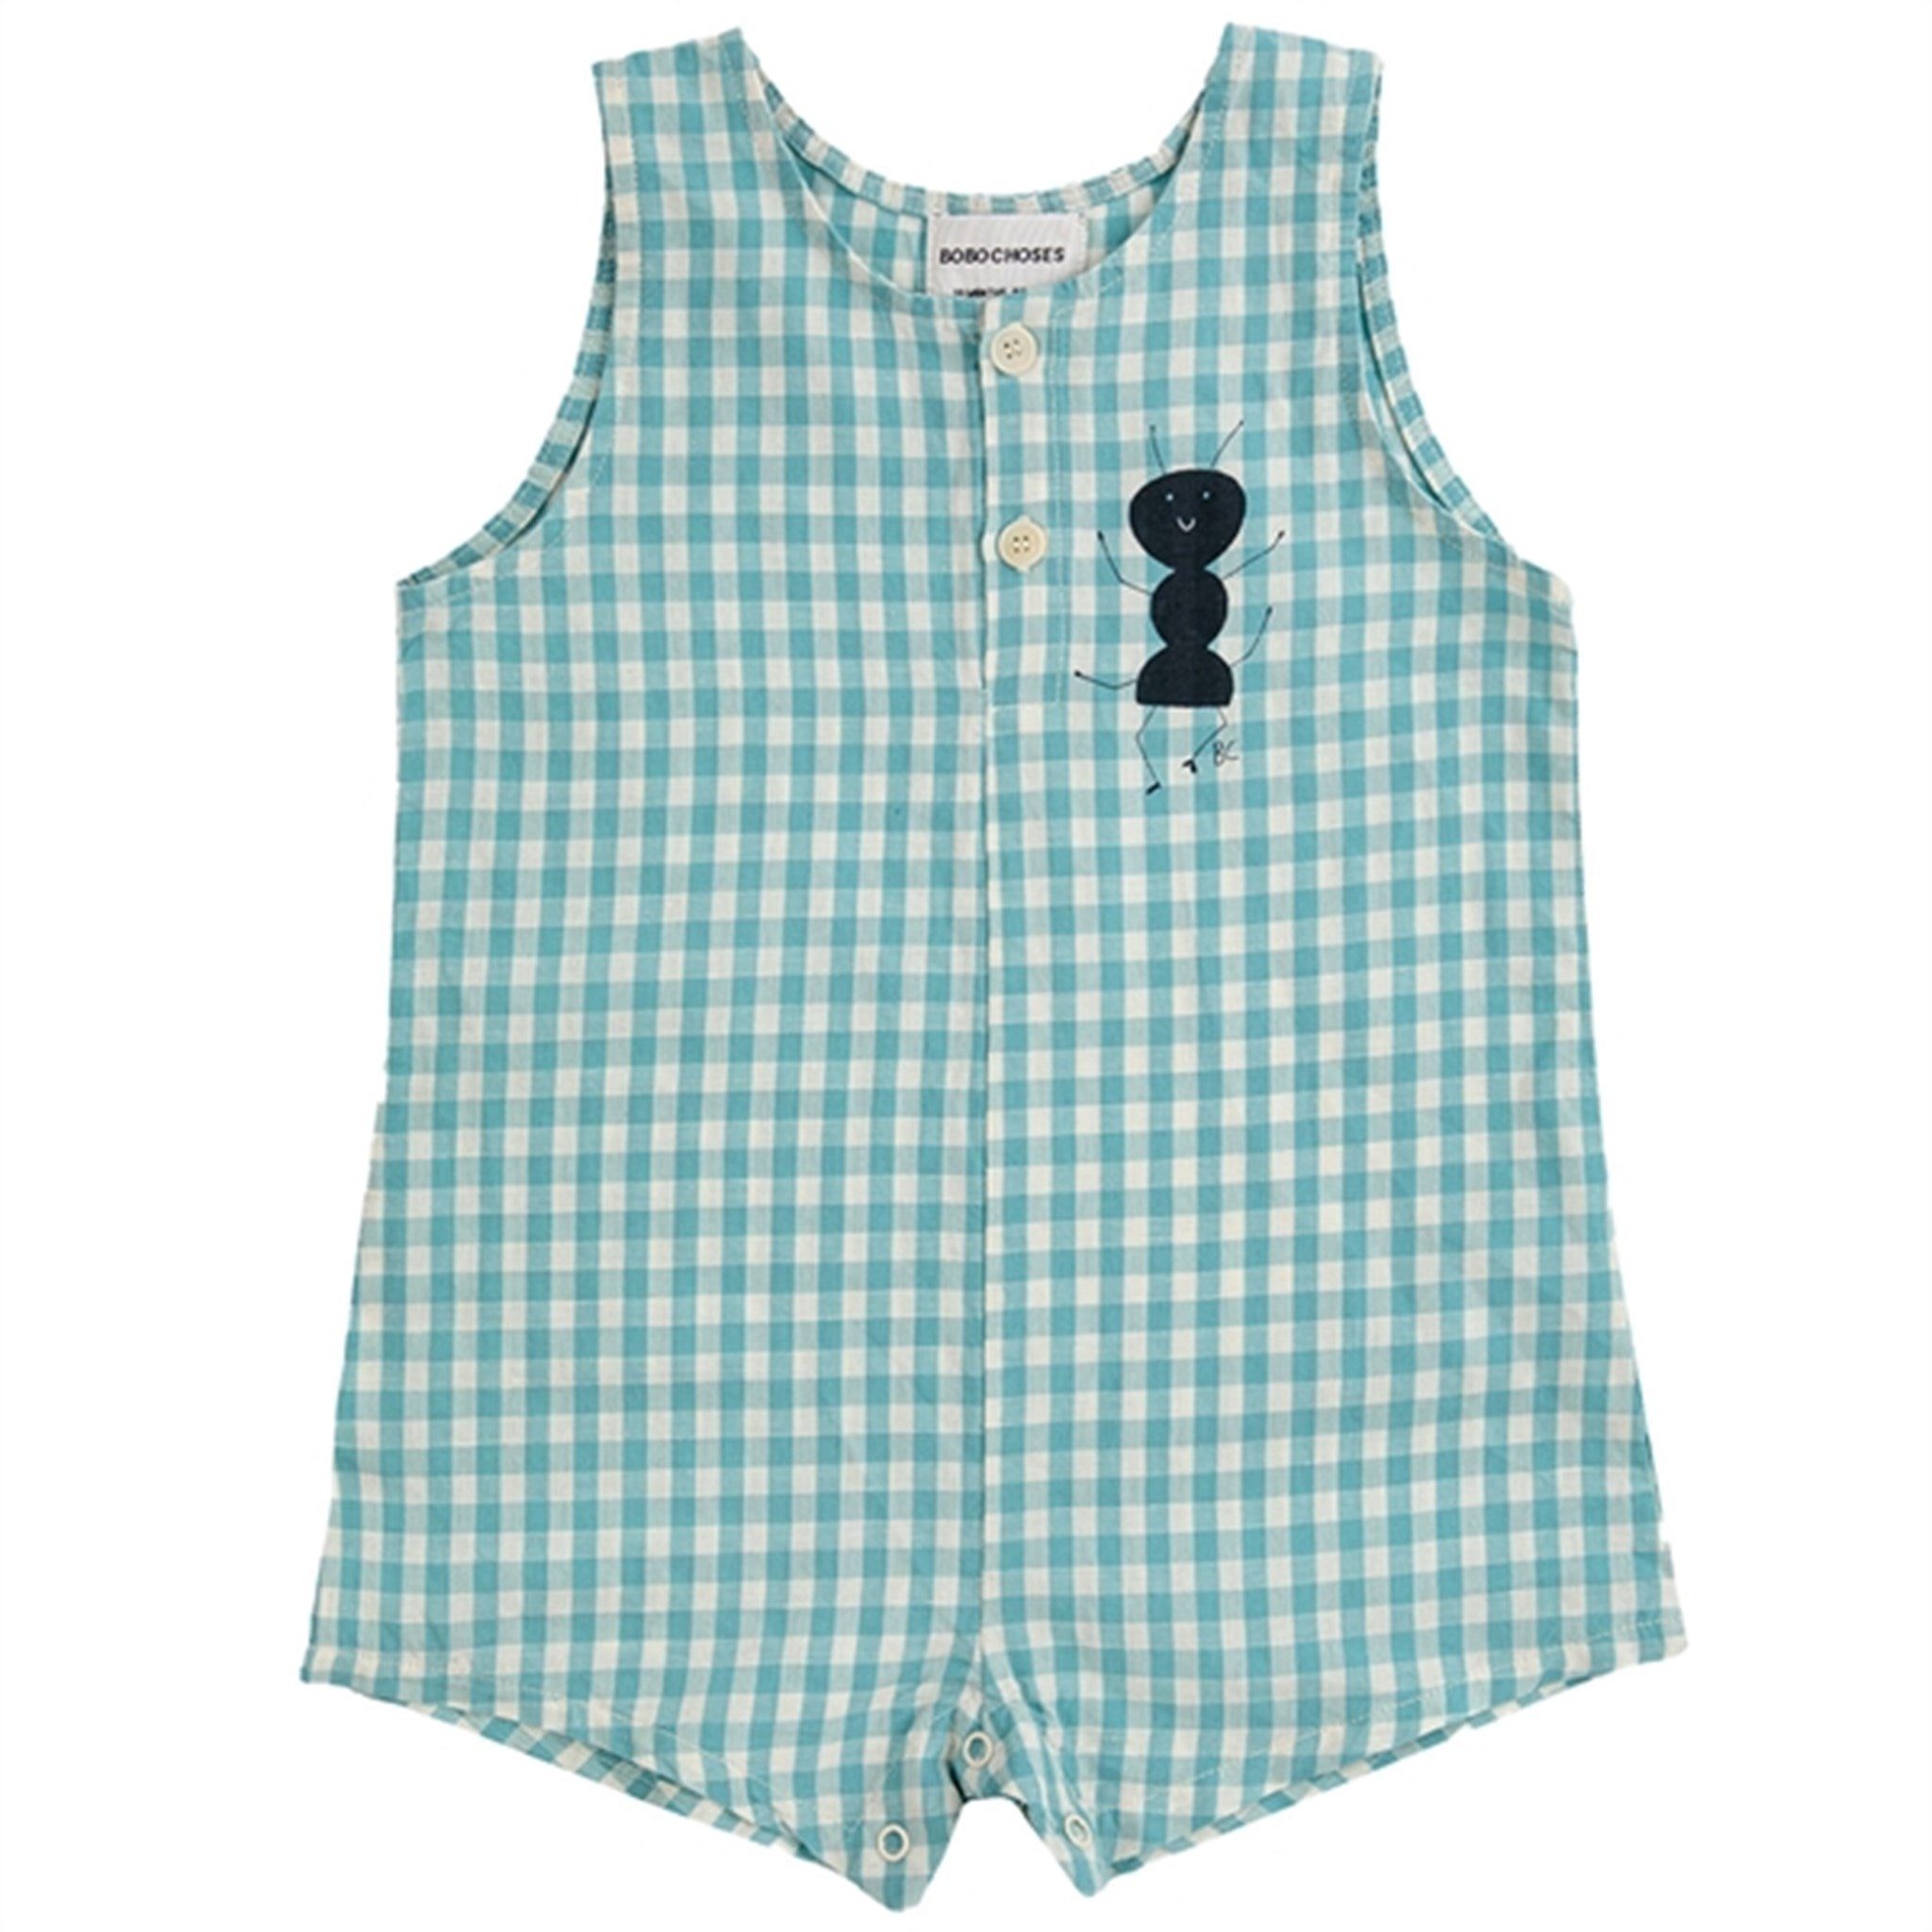 Bobo Choses Bebis Ant Vichy Woven Playsuit Sleeveless Turquoise